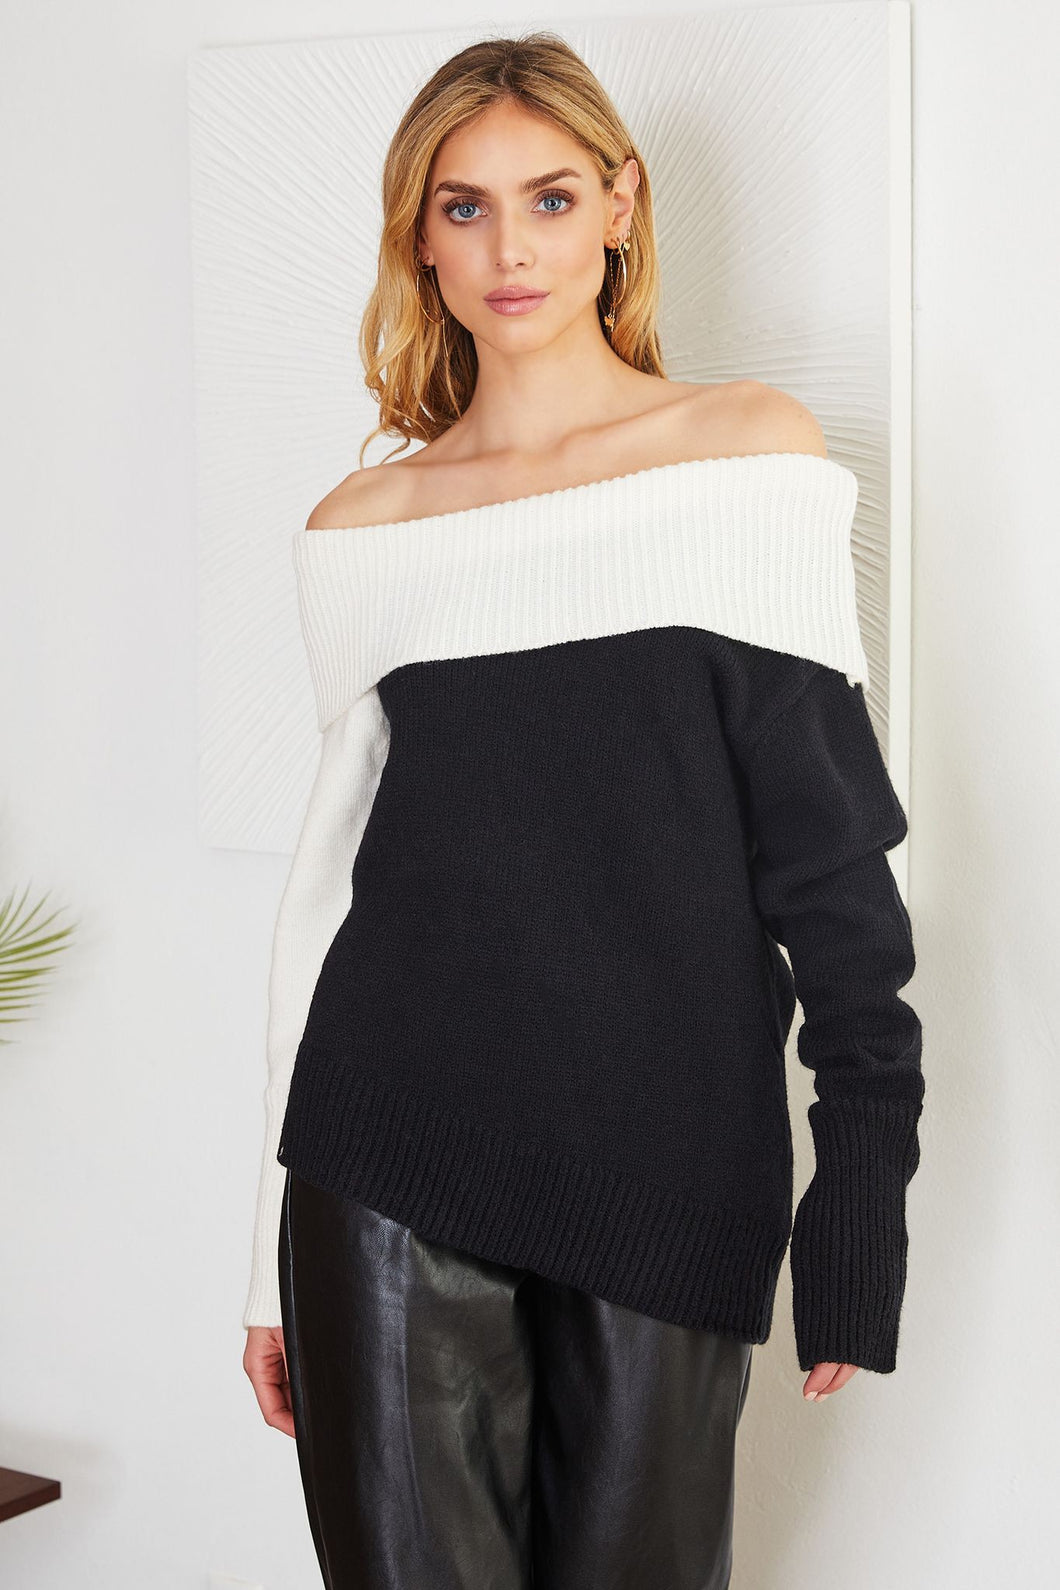 Black Two Tone Off Shoulder Long Sleeve Sweater Knit Venti Top 7/27/23 6699